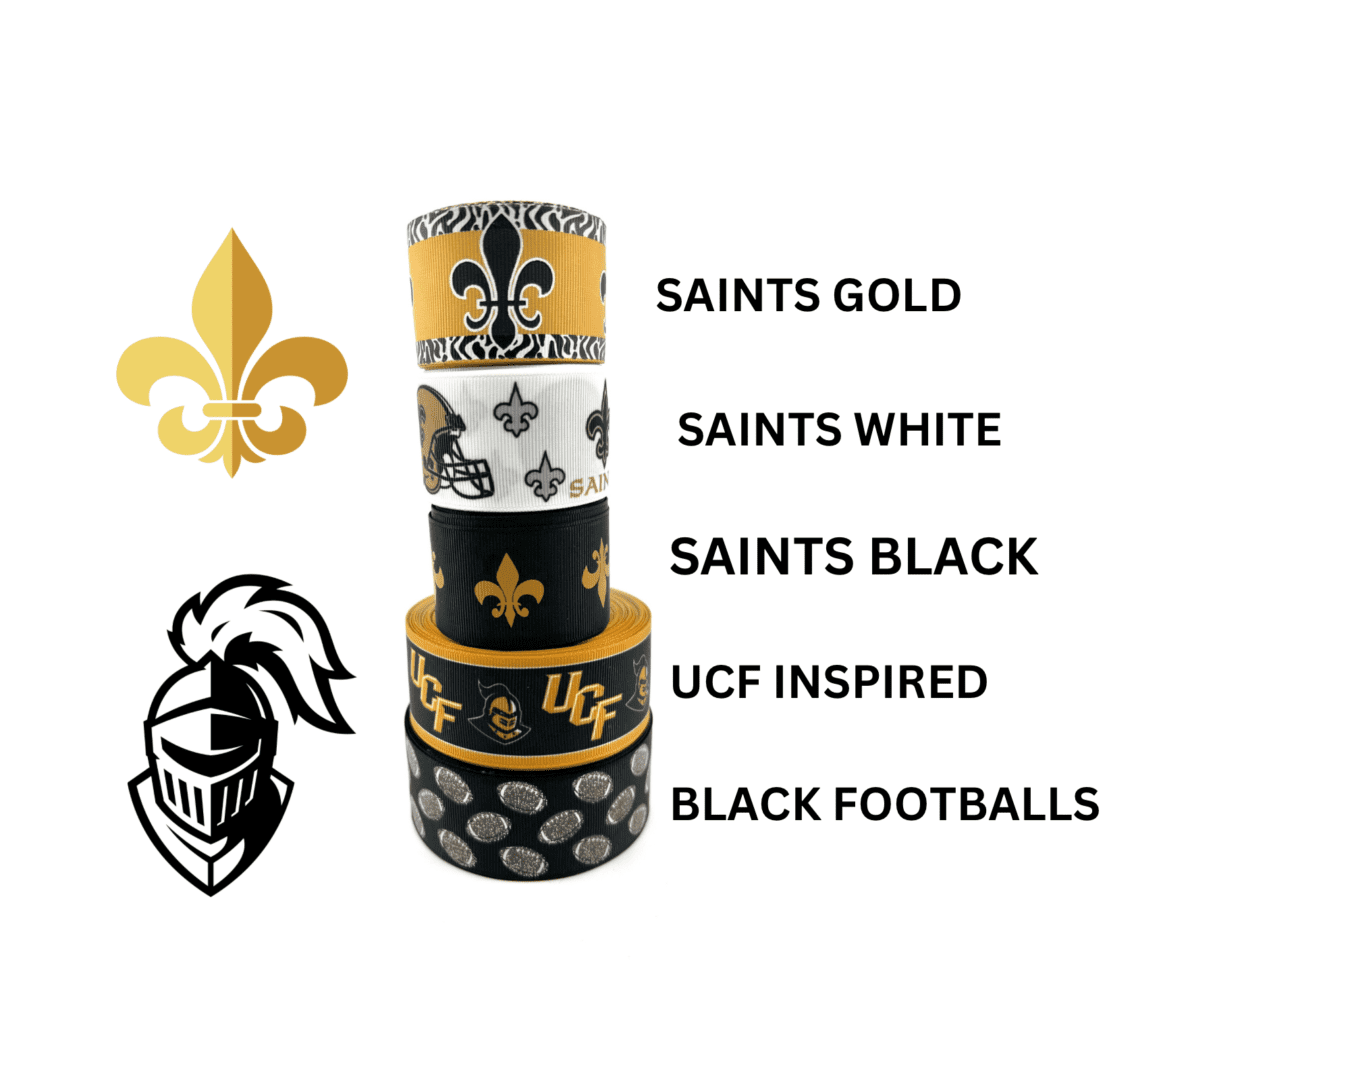 The new orleans saints gold, black, white, and gold.